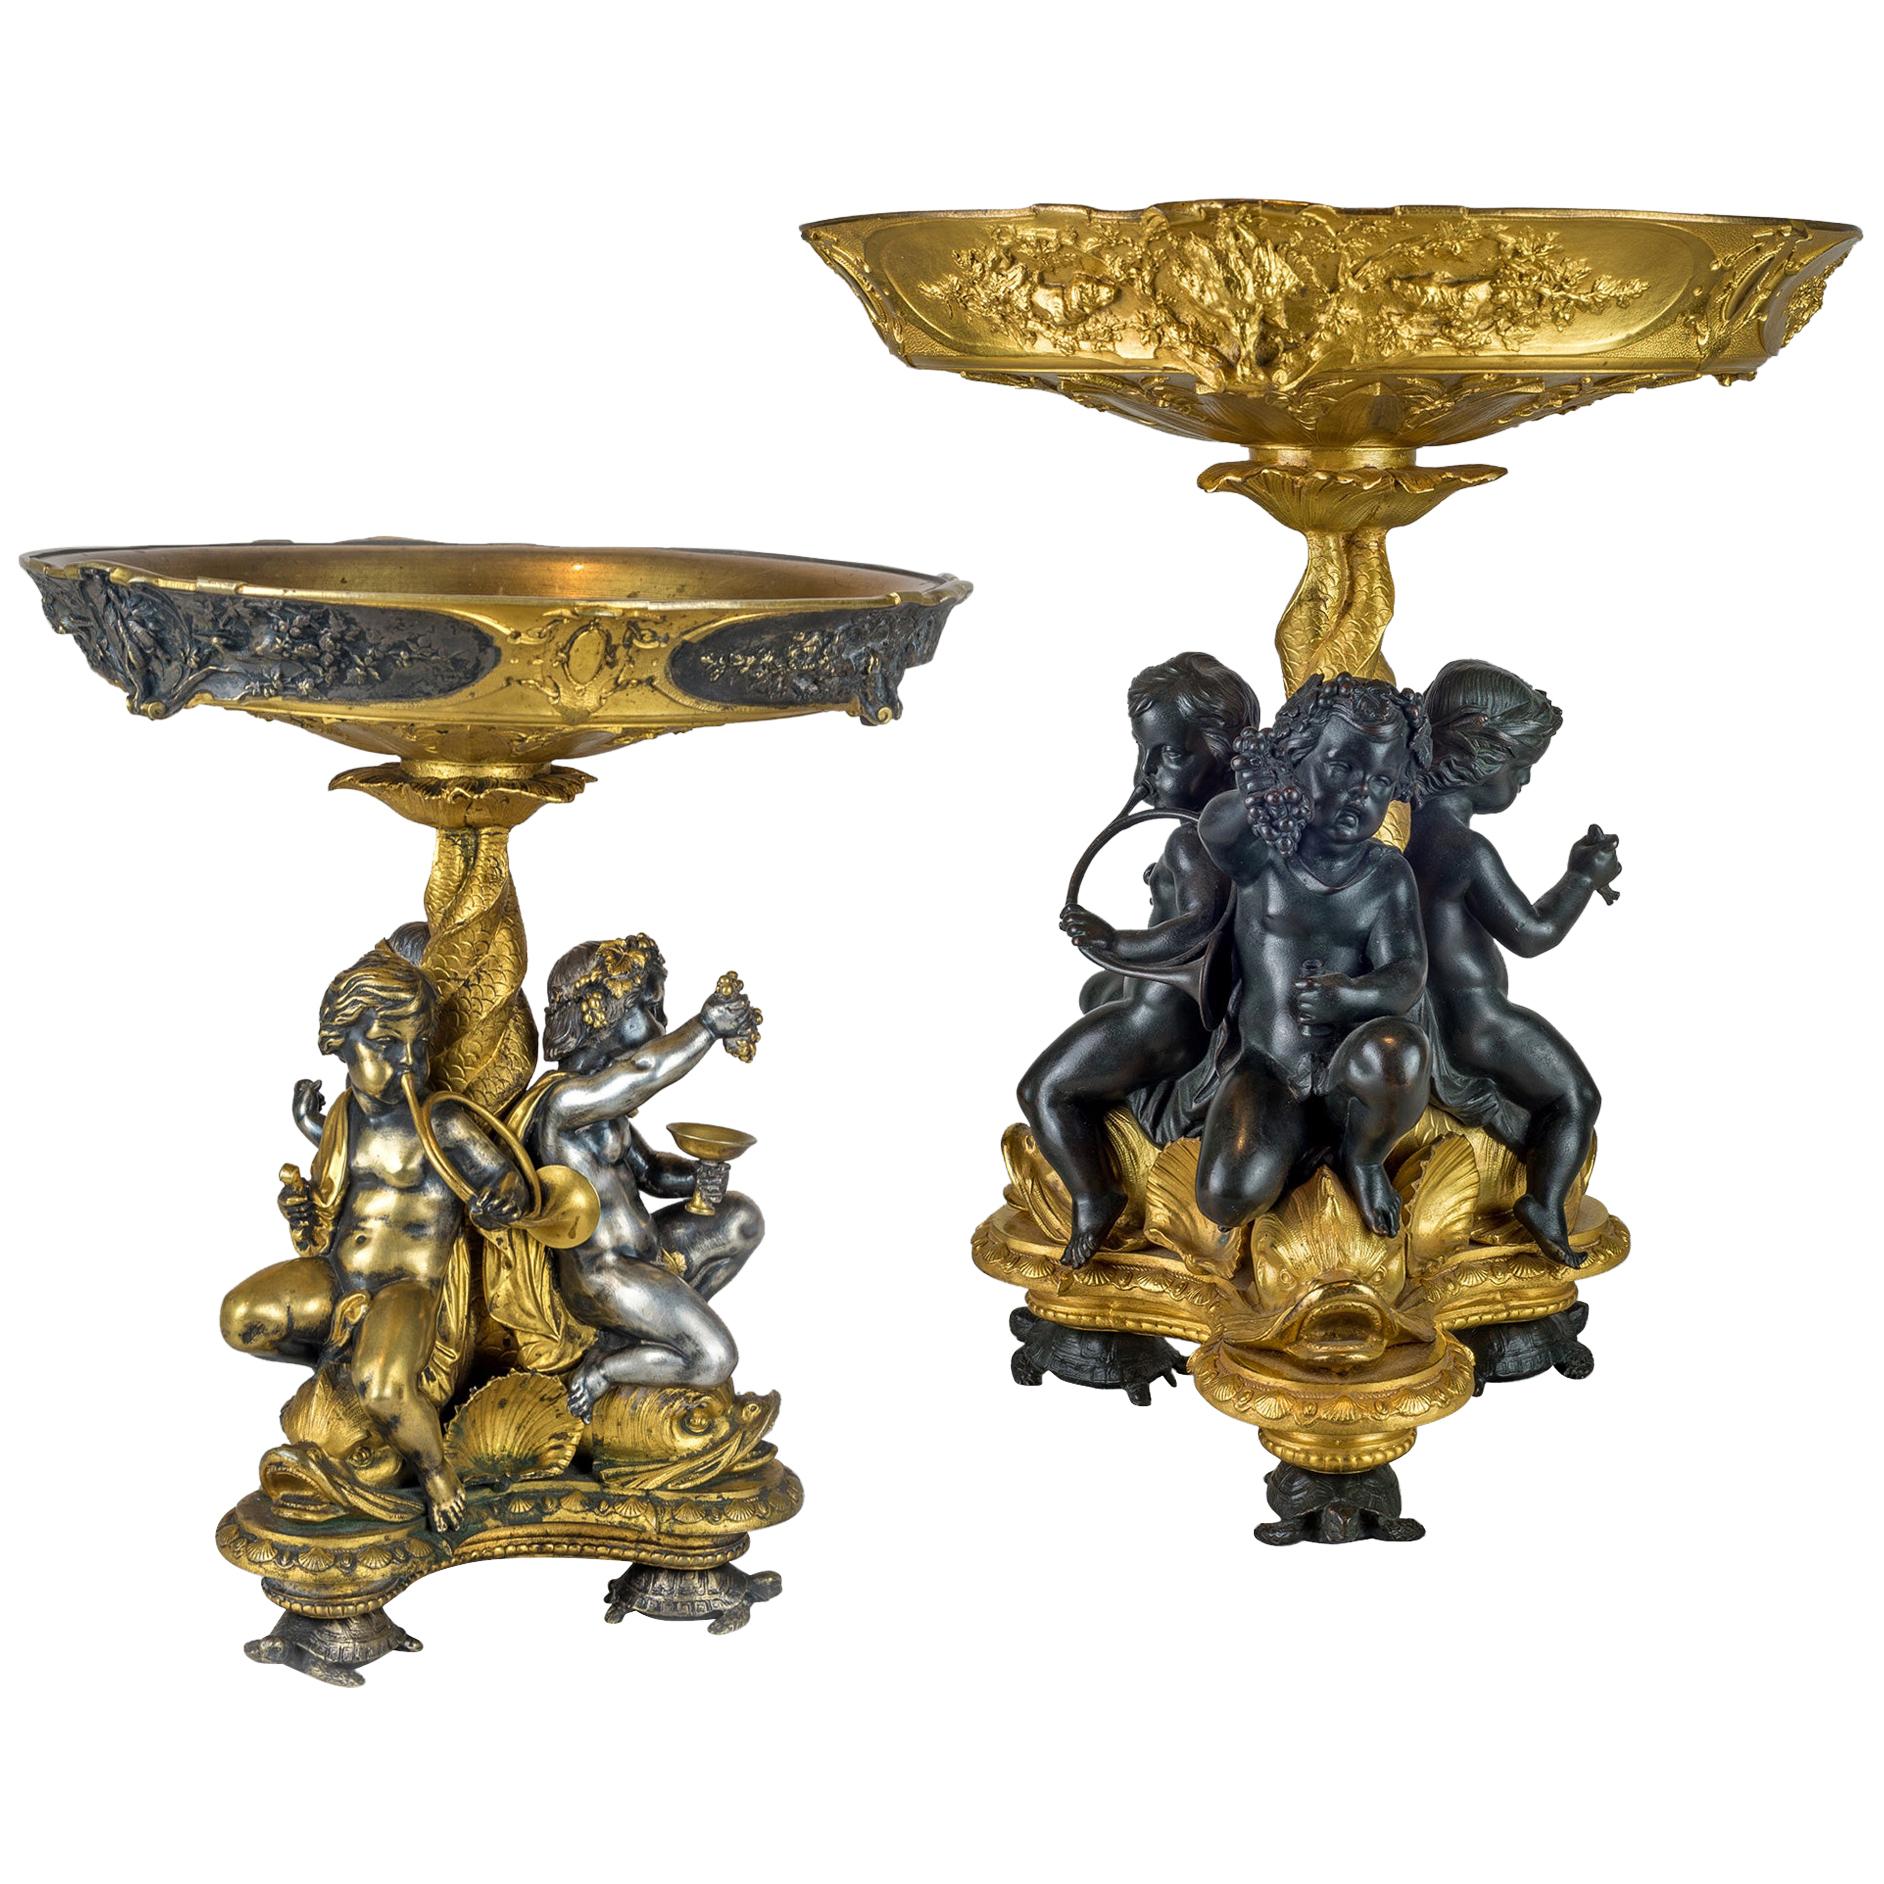 Fine Quality Match Pair of Napoleon III Silvered and Gilt Bronze Figural Tazza